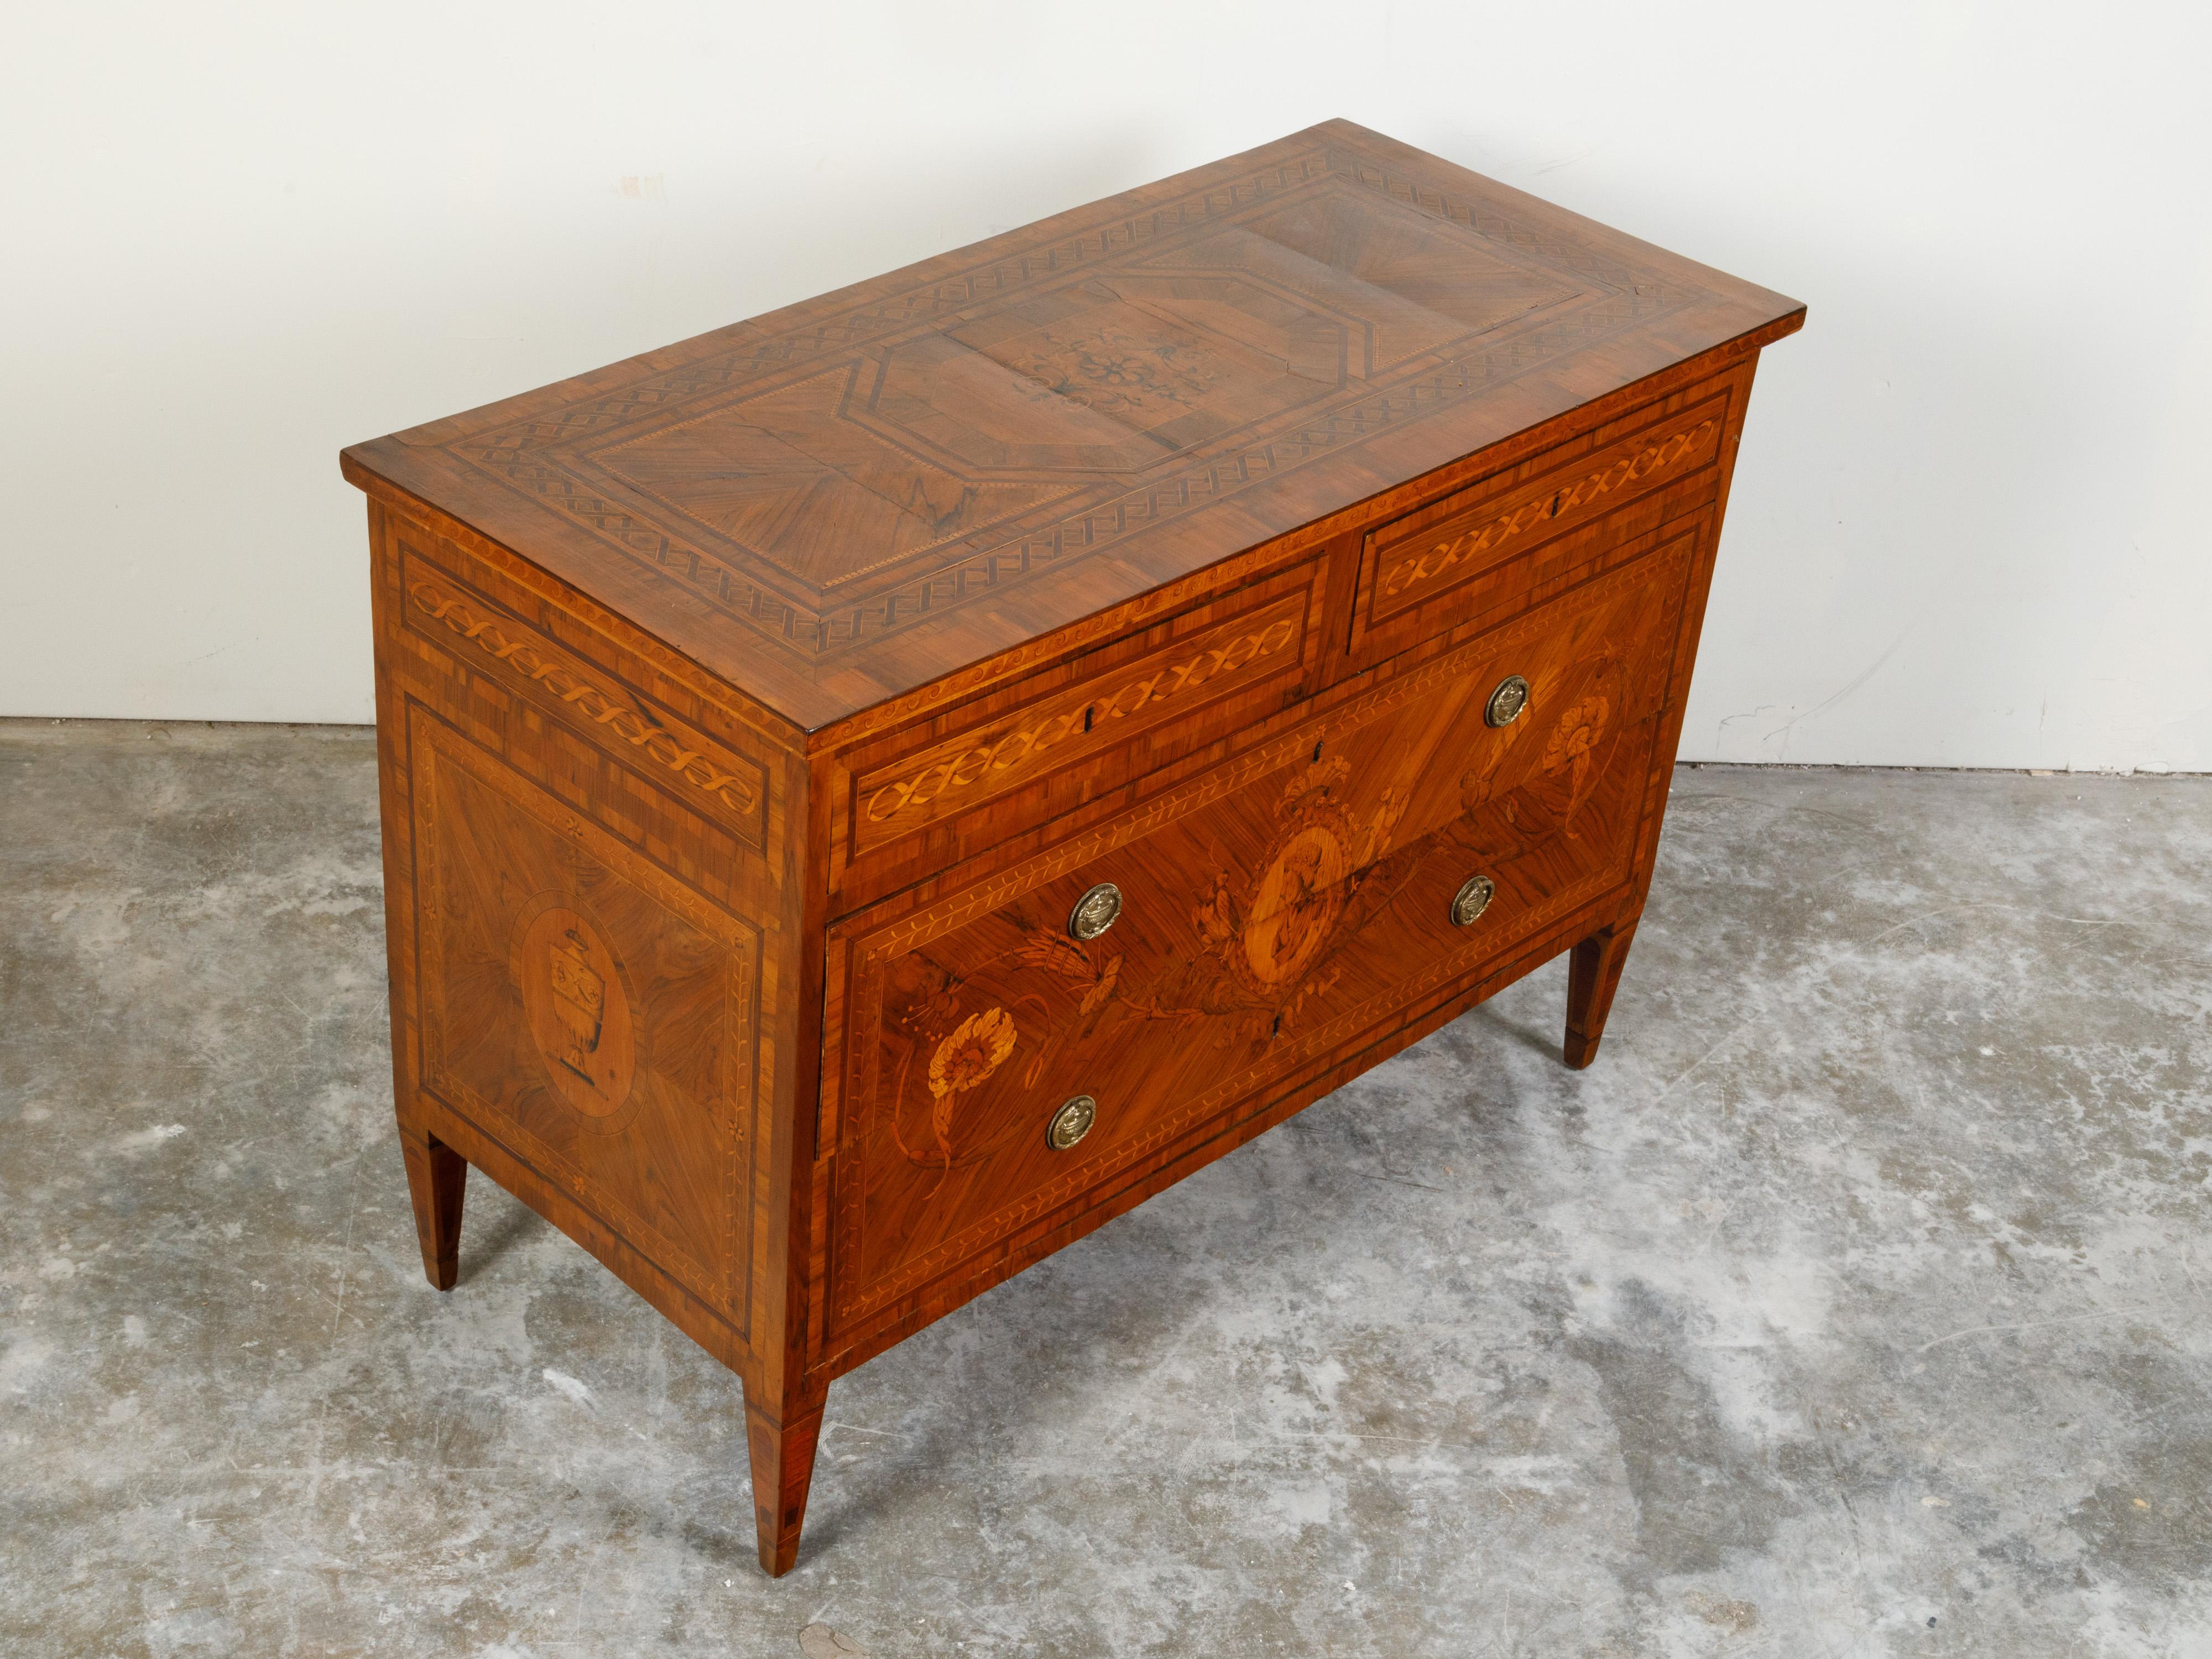 Italian Neoclassical Period 1800s Fruitwood Four-Drawer Commode with Marquetry For Sale 3